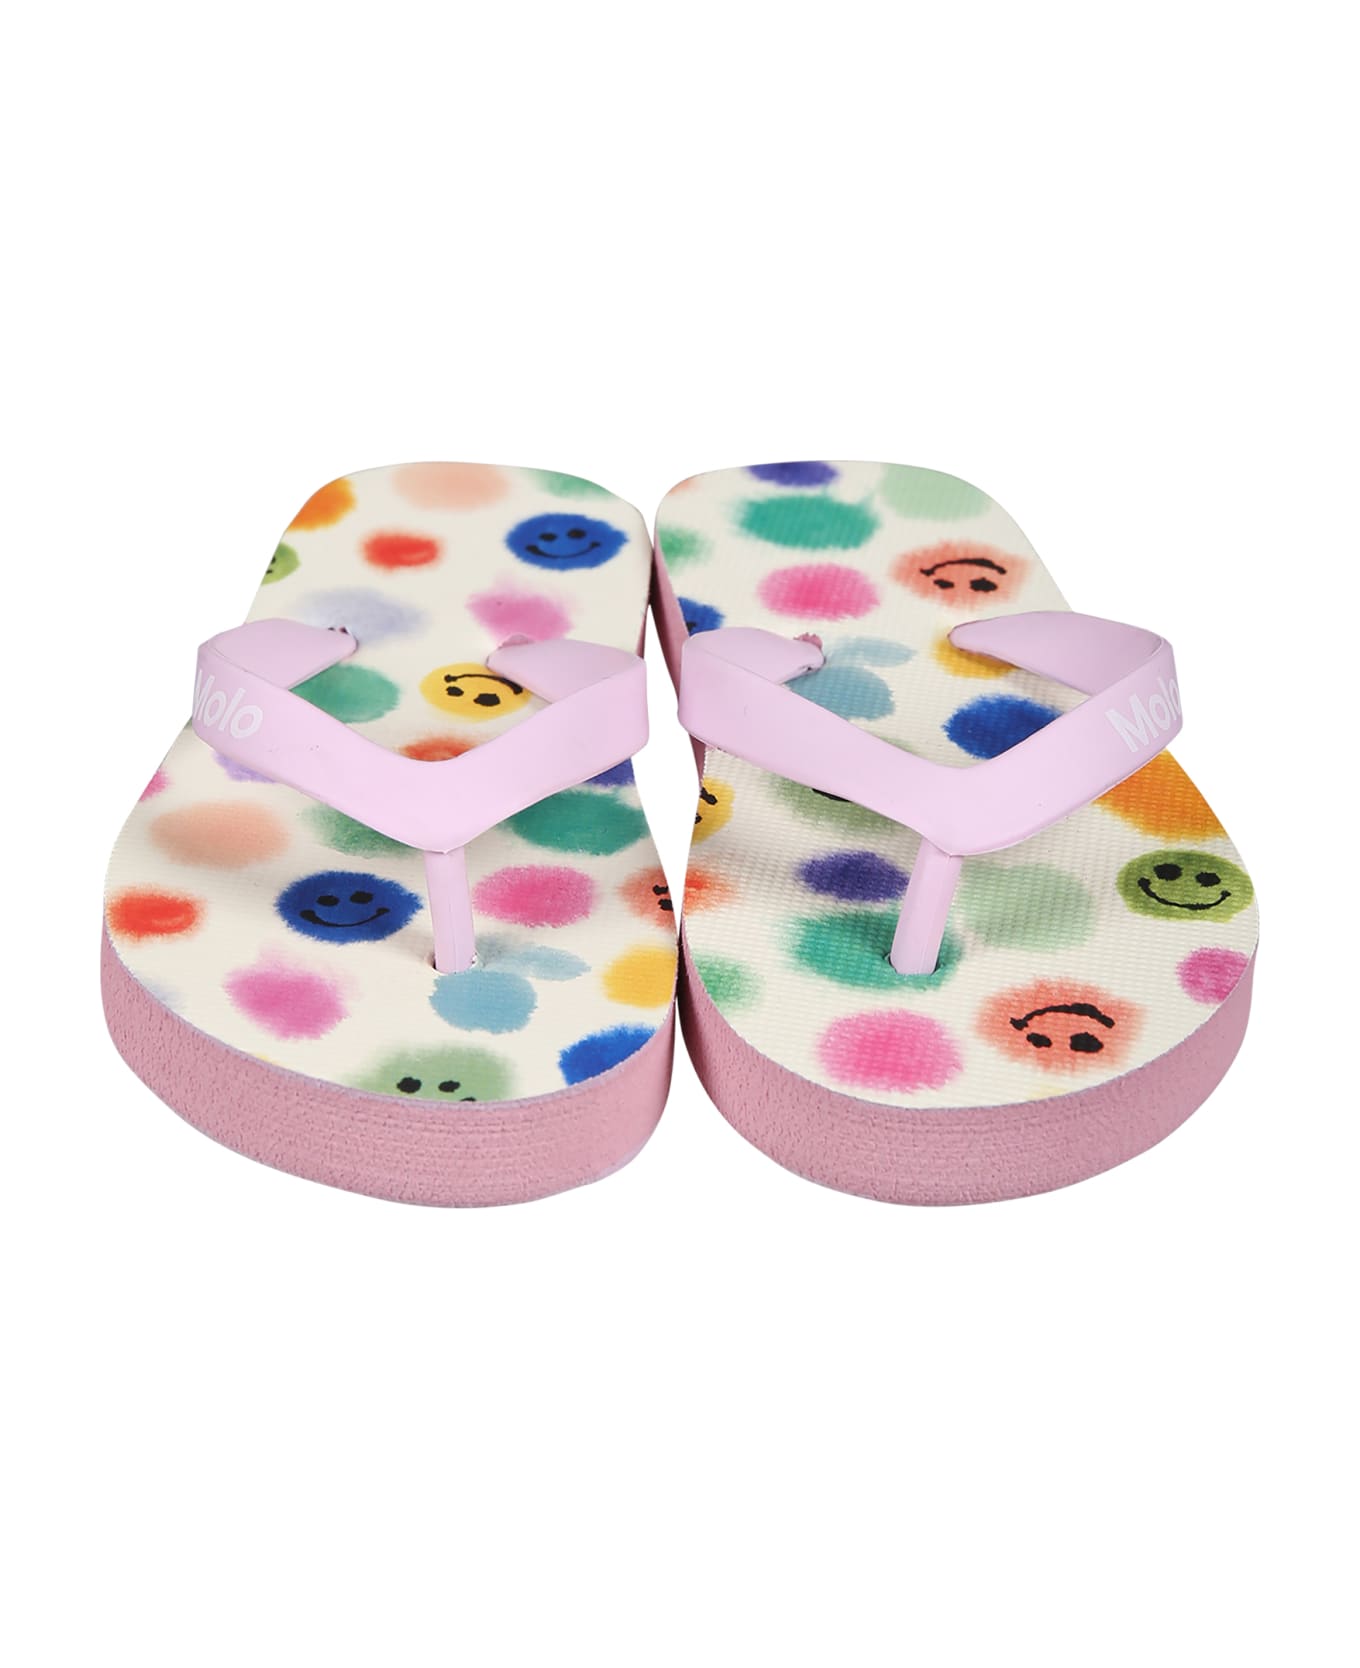 Molo Pink Flip Flops For Girl With Smile - Multicolor シューズ